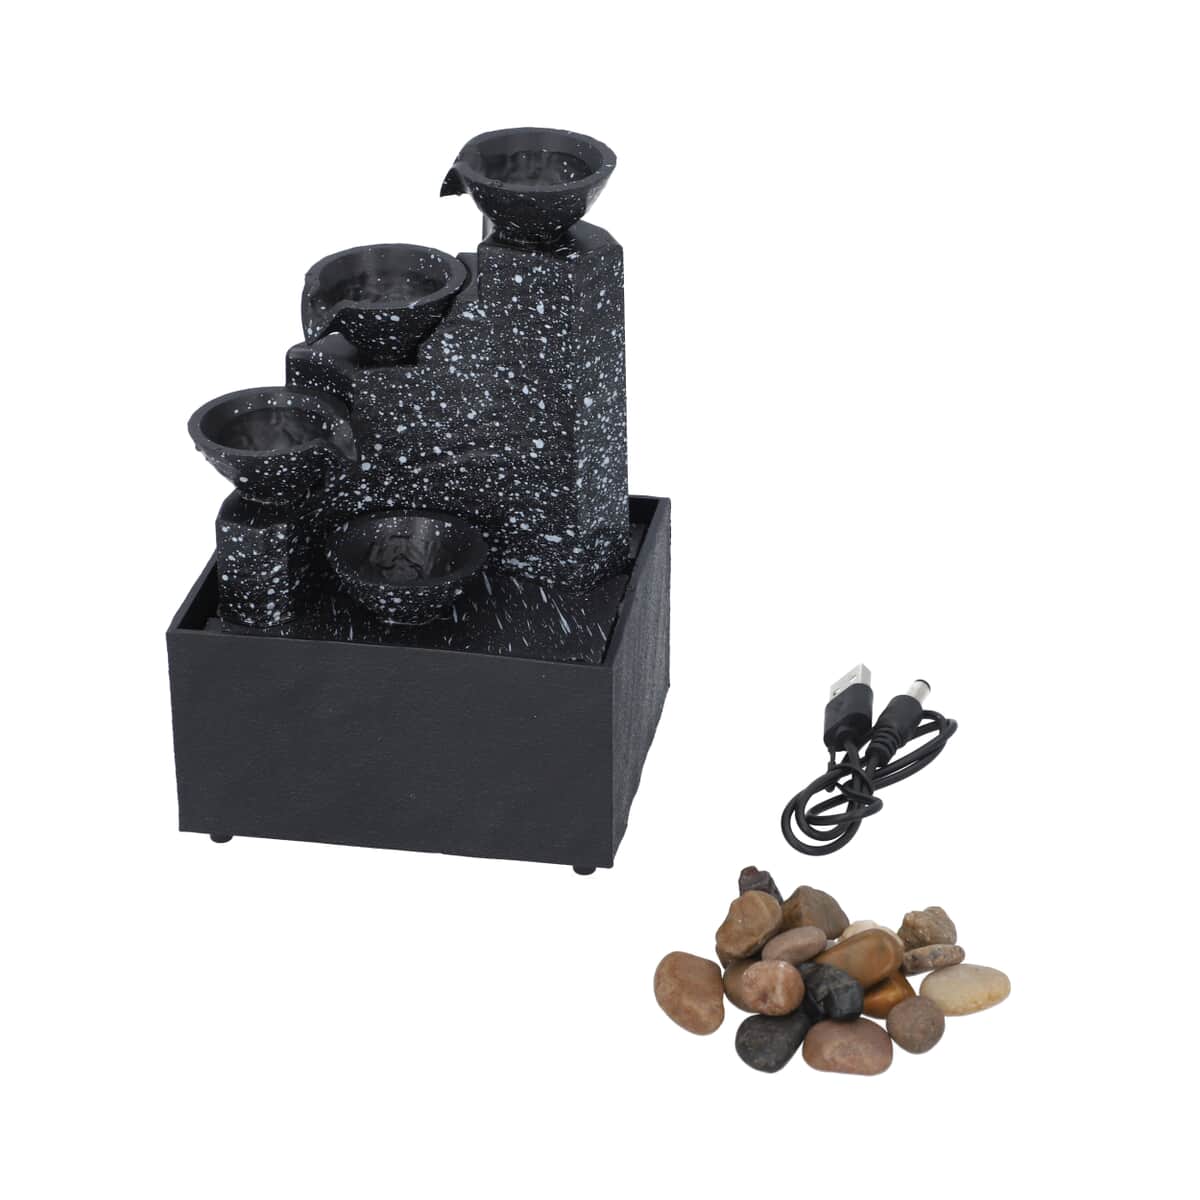 Black Mini Four Liquor Cups Water Fountain with LED Light, Battery Operated 3 Tier Table Top Indoor Outdoor Showpiece Fountain for Living Room Table Decor Bedroom Office - Water Circulation (2xAA Battery Not Included) image number 4